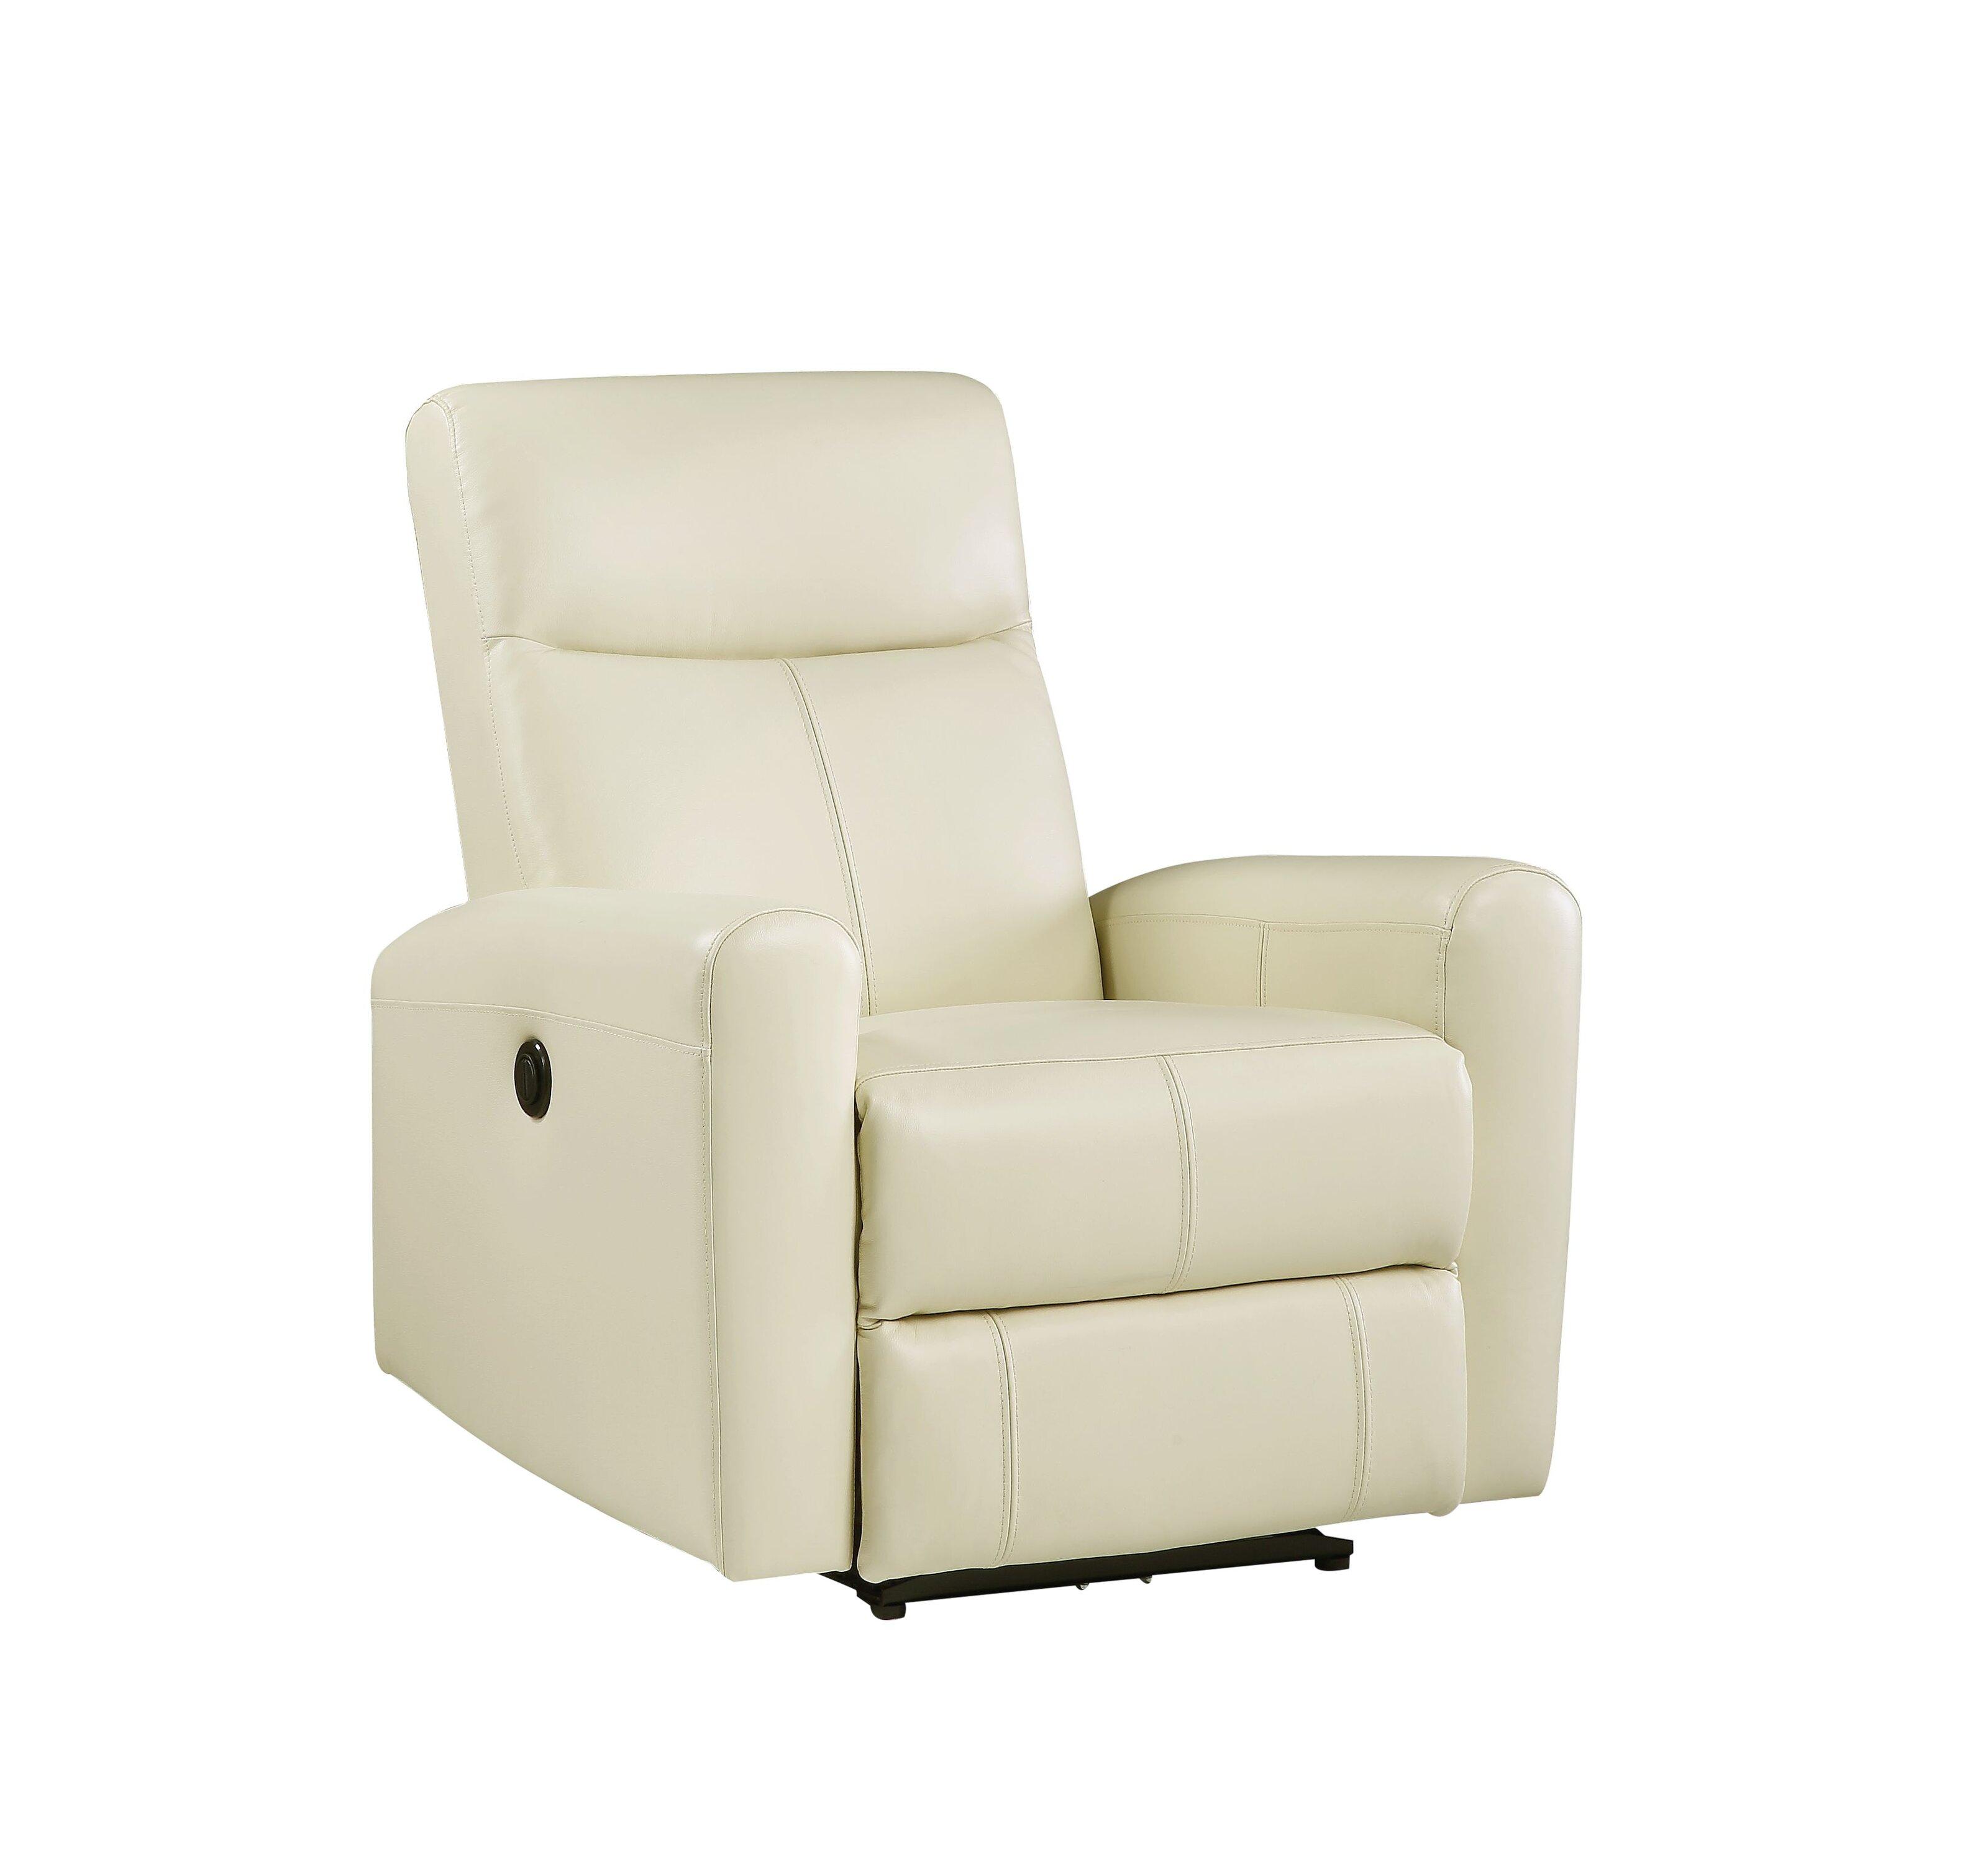 

    
Contemporary Beige Top Grain Leather Match Recliner by Acme Blane 59772
